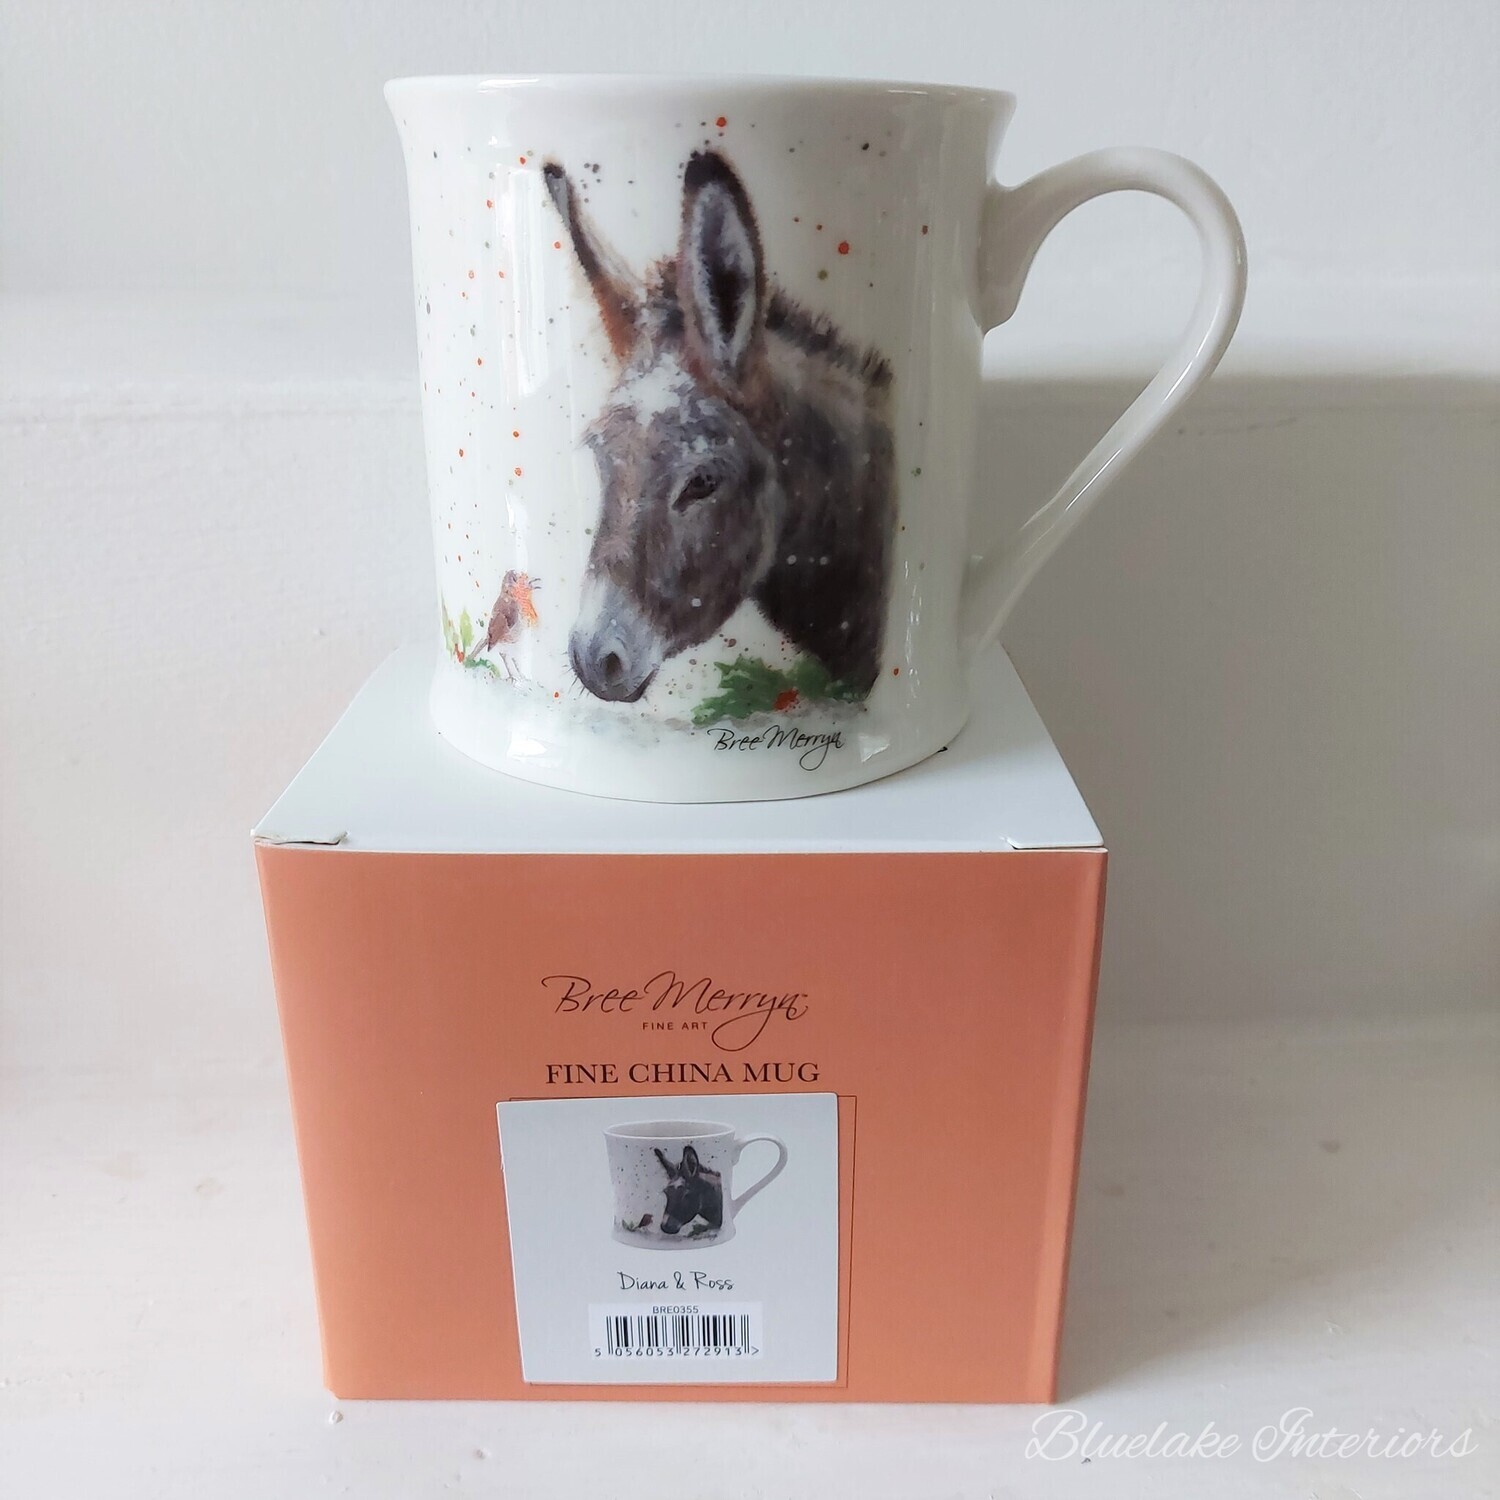 Diana & Ross The Donkey & Robin Gift Christmas Boxed Mug Bree Merryn Collection